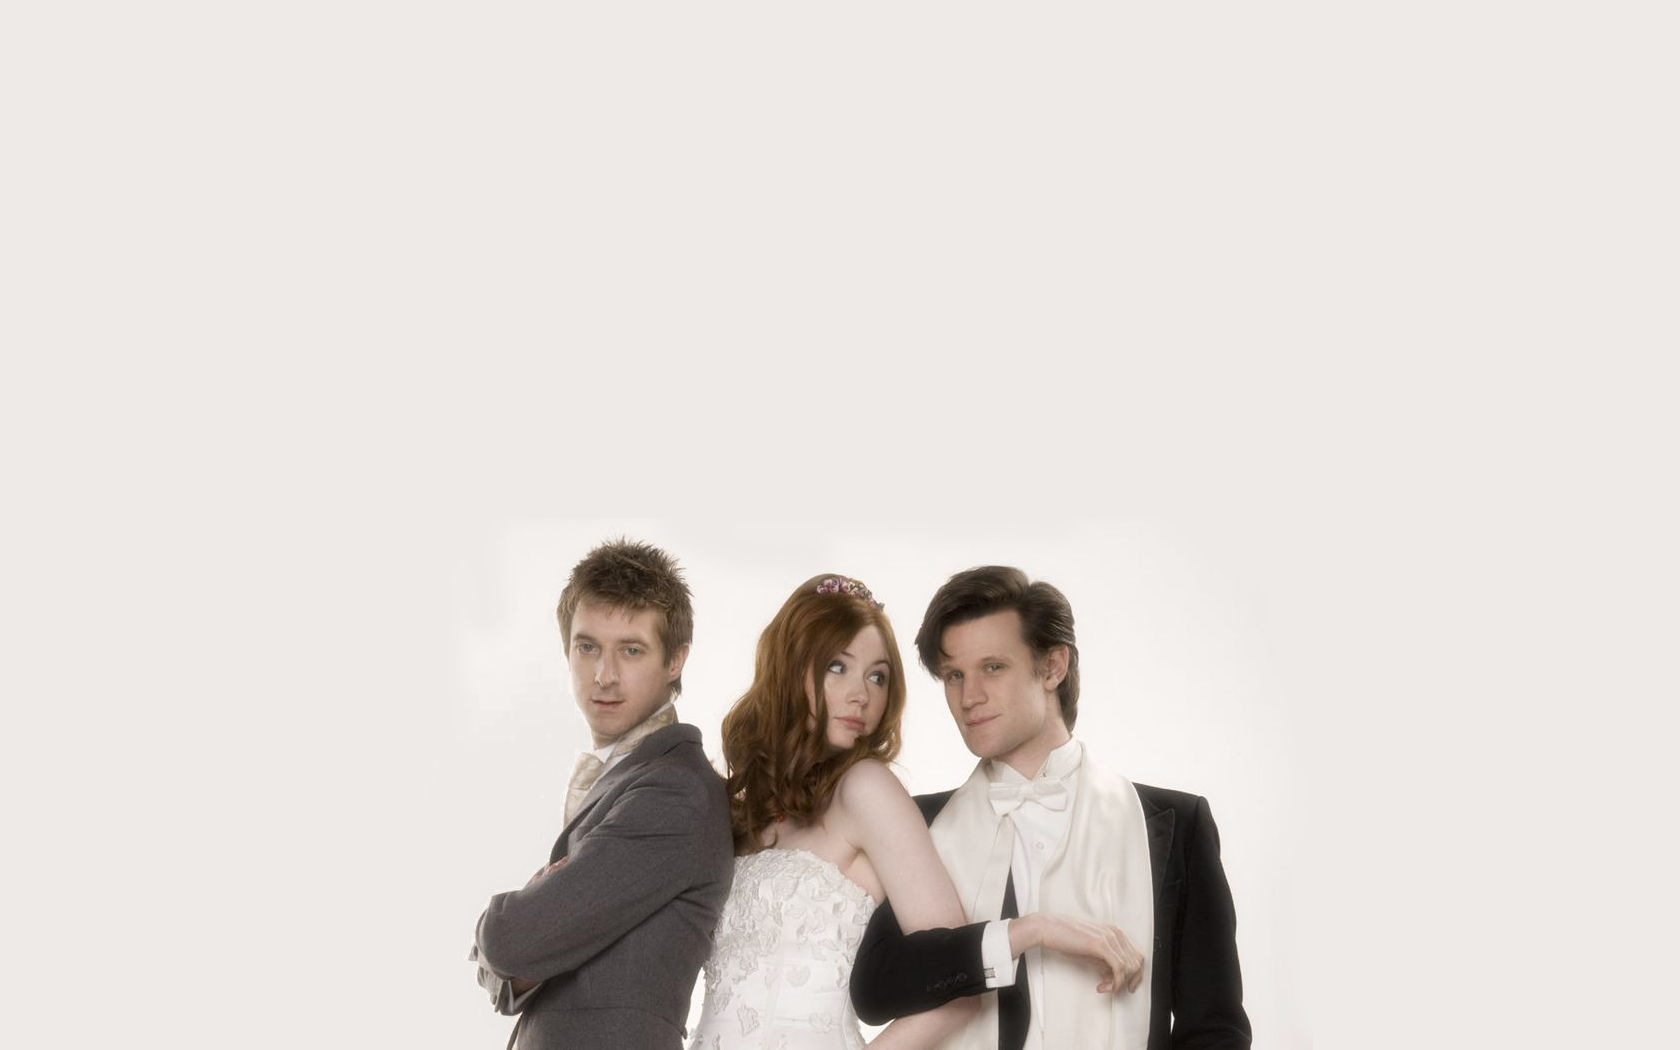 Doctor Who Wallpaper 109